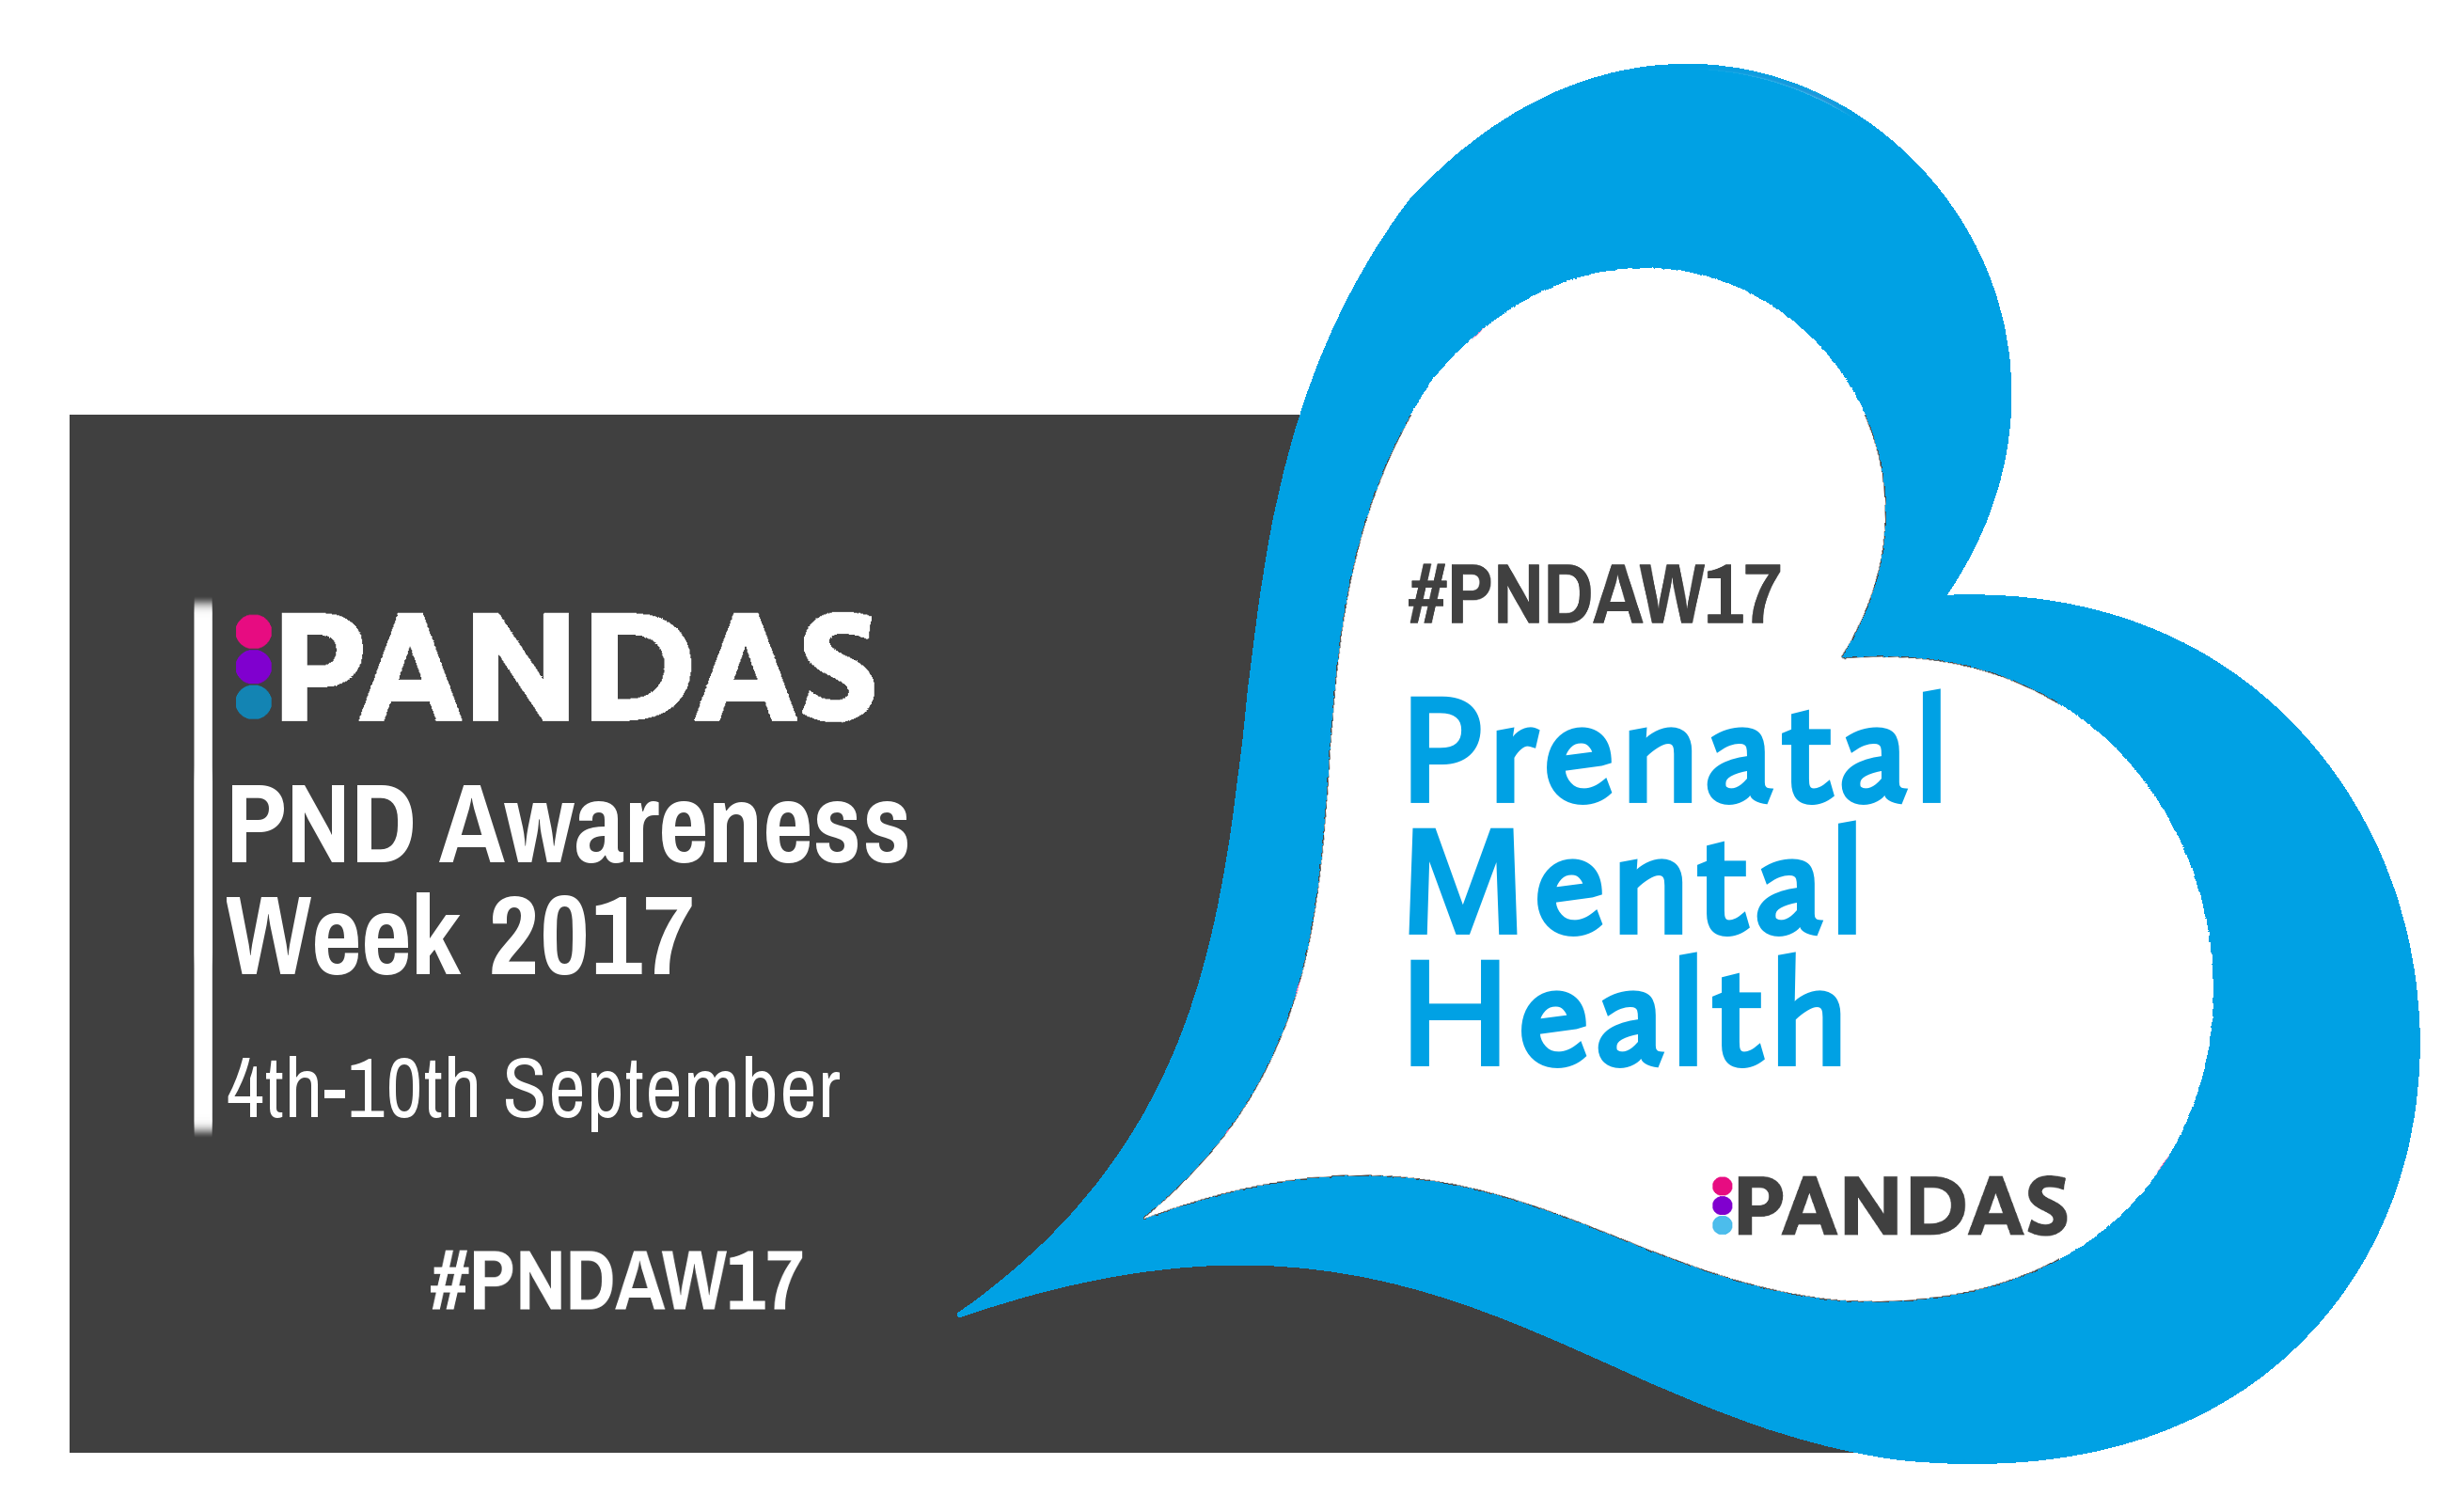 Twitter Chat on Mums and Mums-To-Be Mental Health for PND Awareness Week #PNDAW17